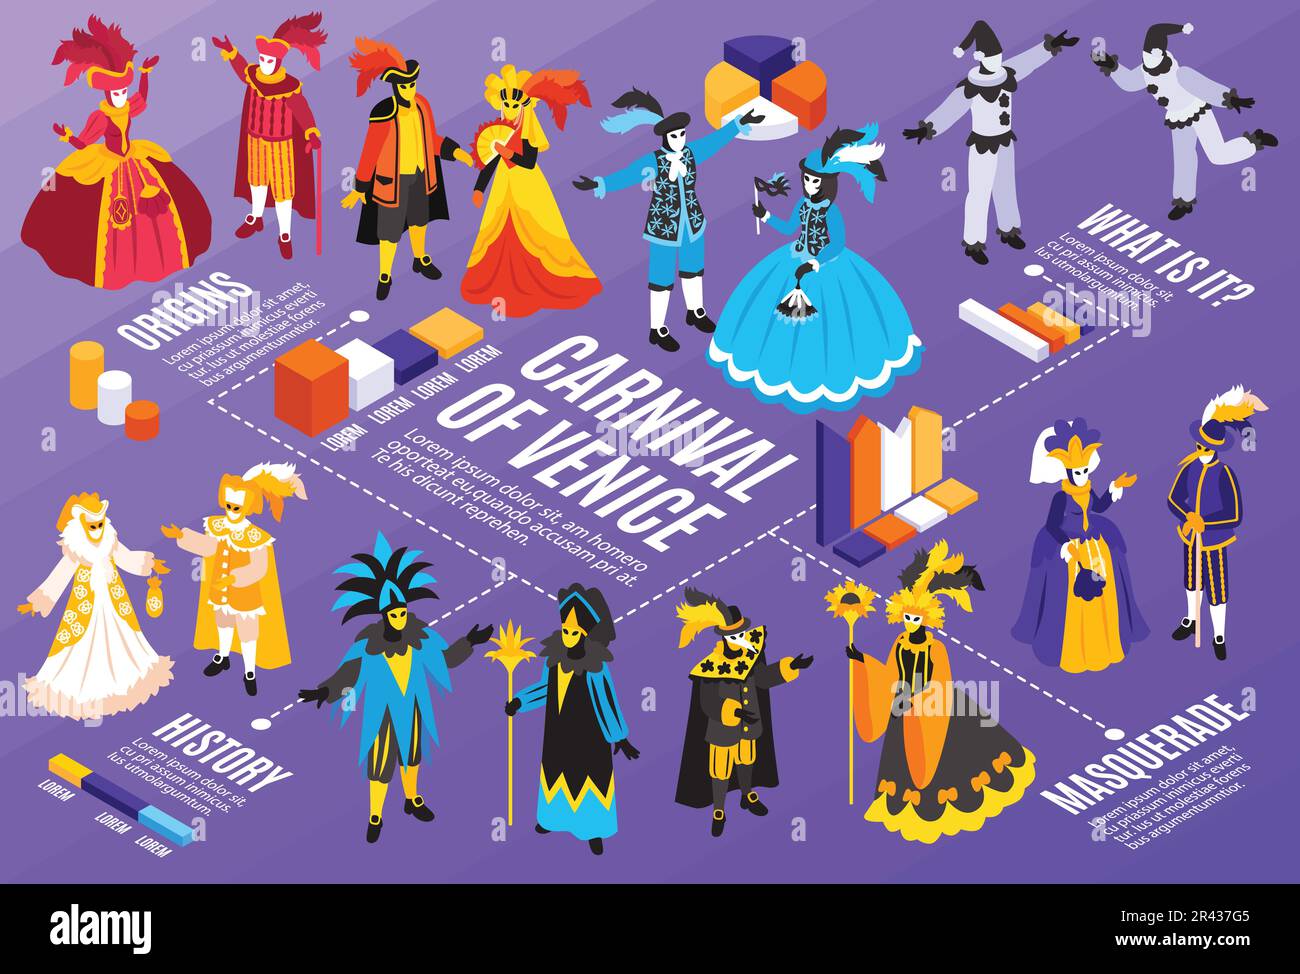 Isometric venetian costumes carnival horizontal composition with text captions bar charts and human characters wearing apparel vector illustration Stock Vector